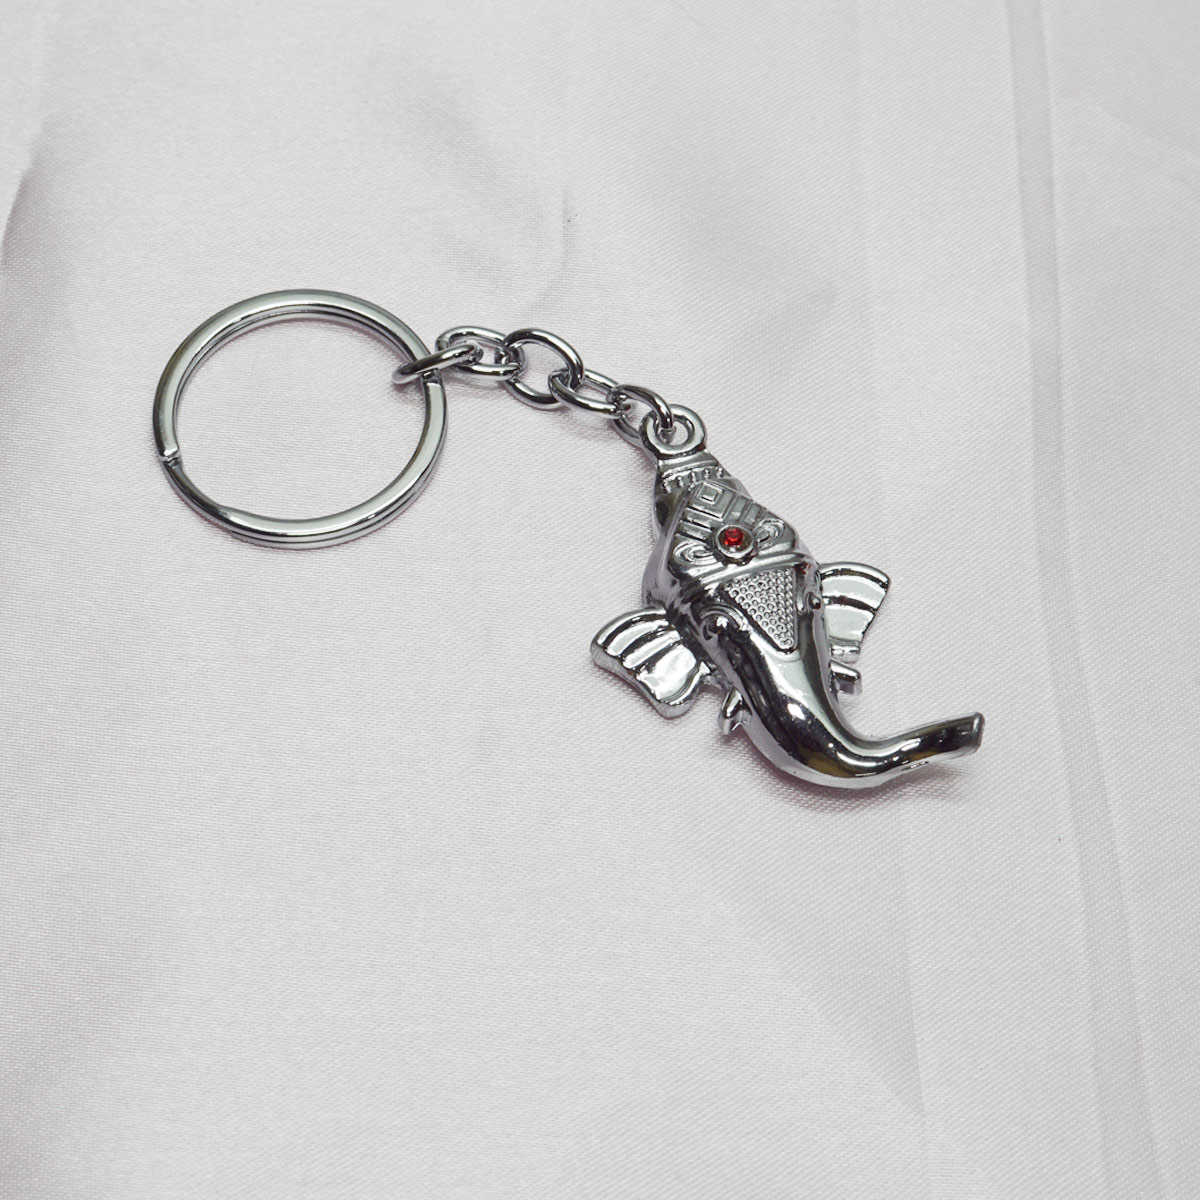 penhouse.in Goodluck Silver Color Ganesh Face Keychain SKU KP040